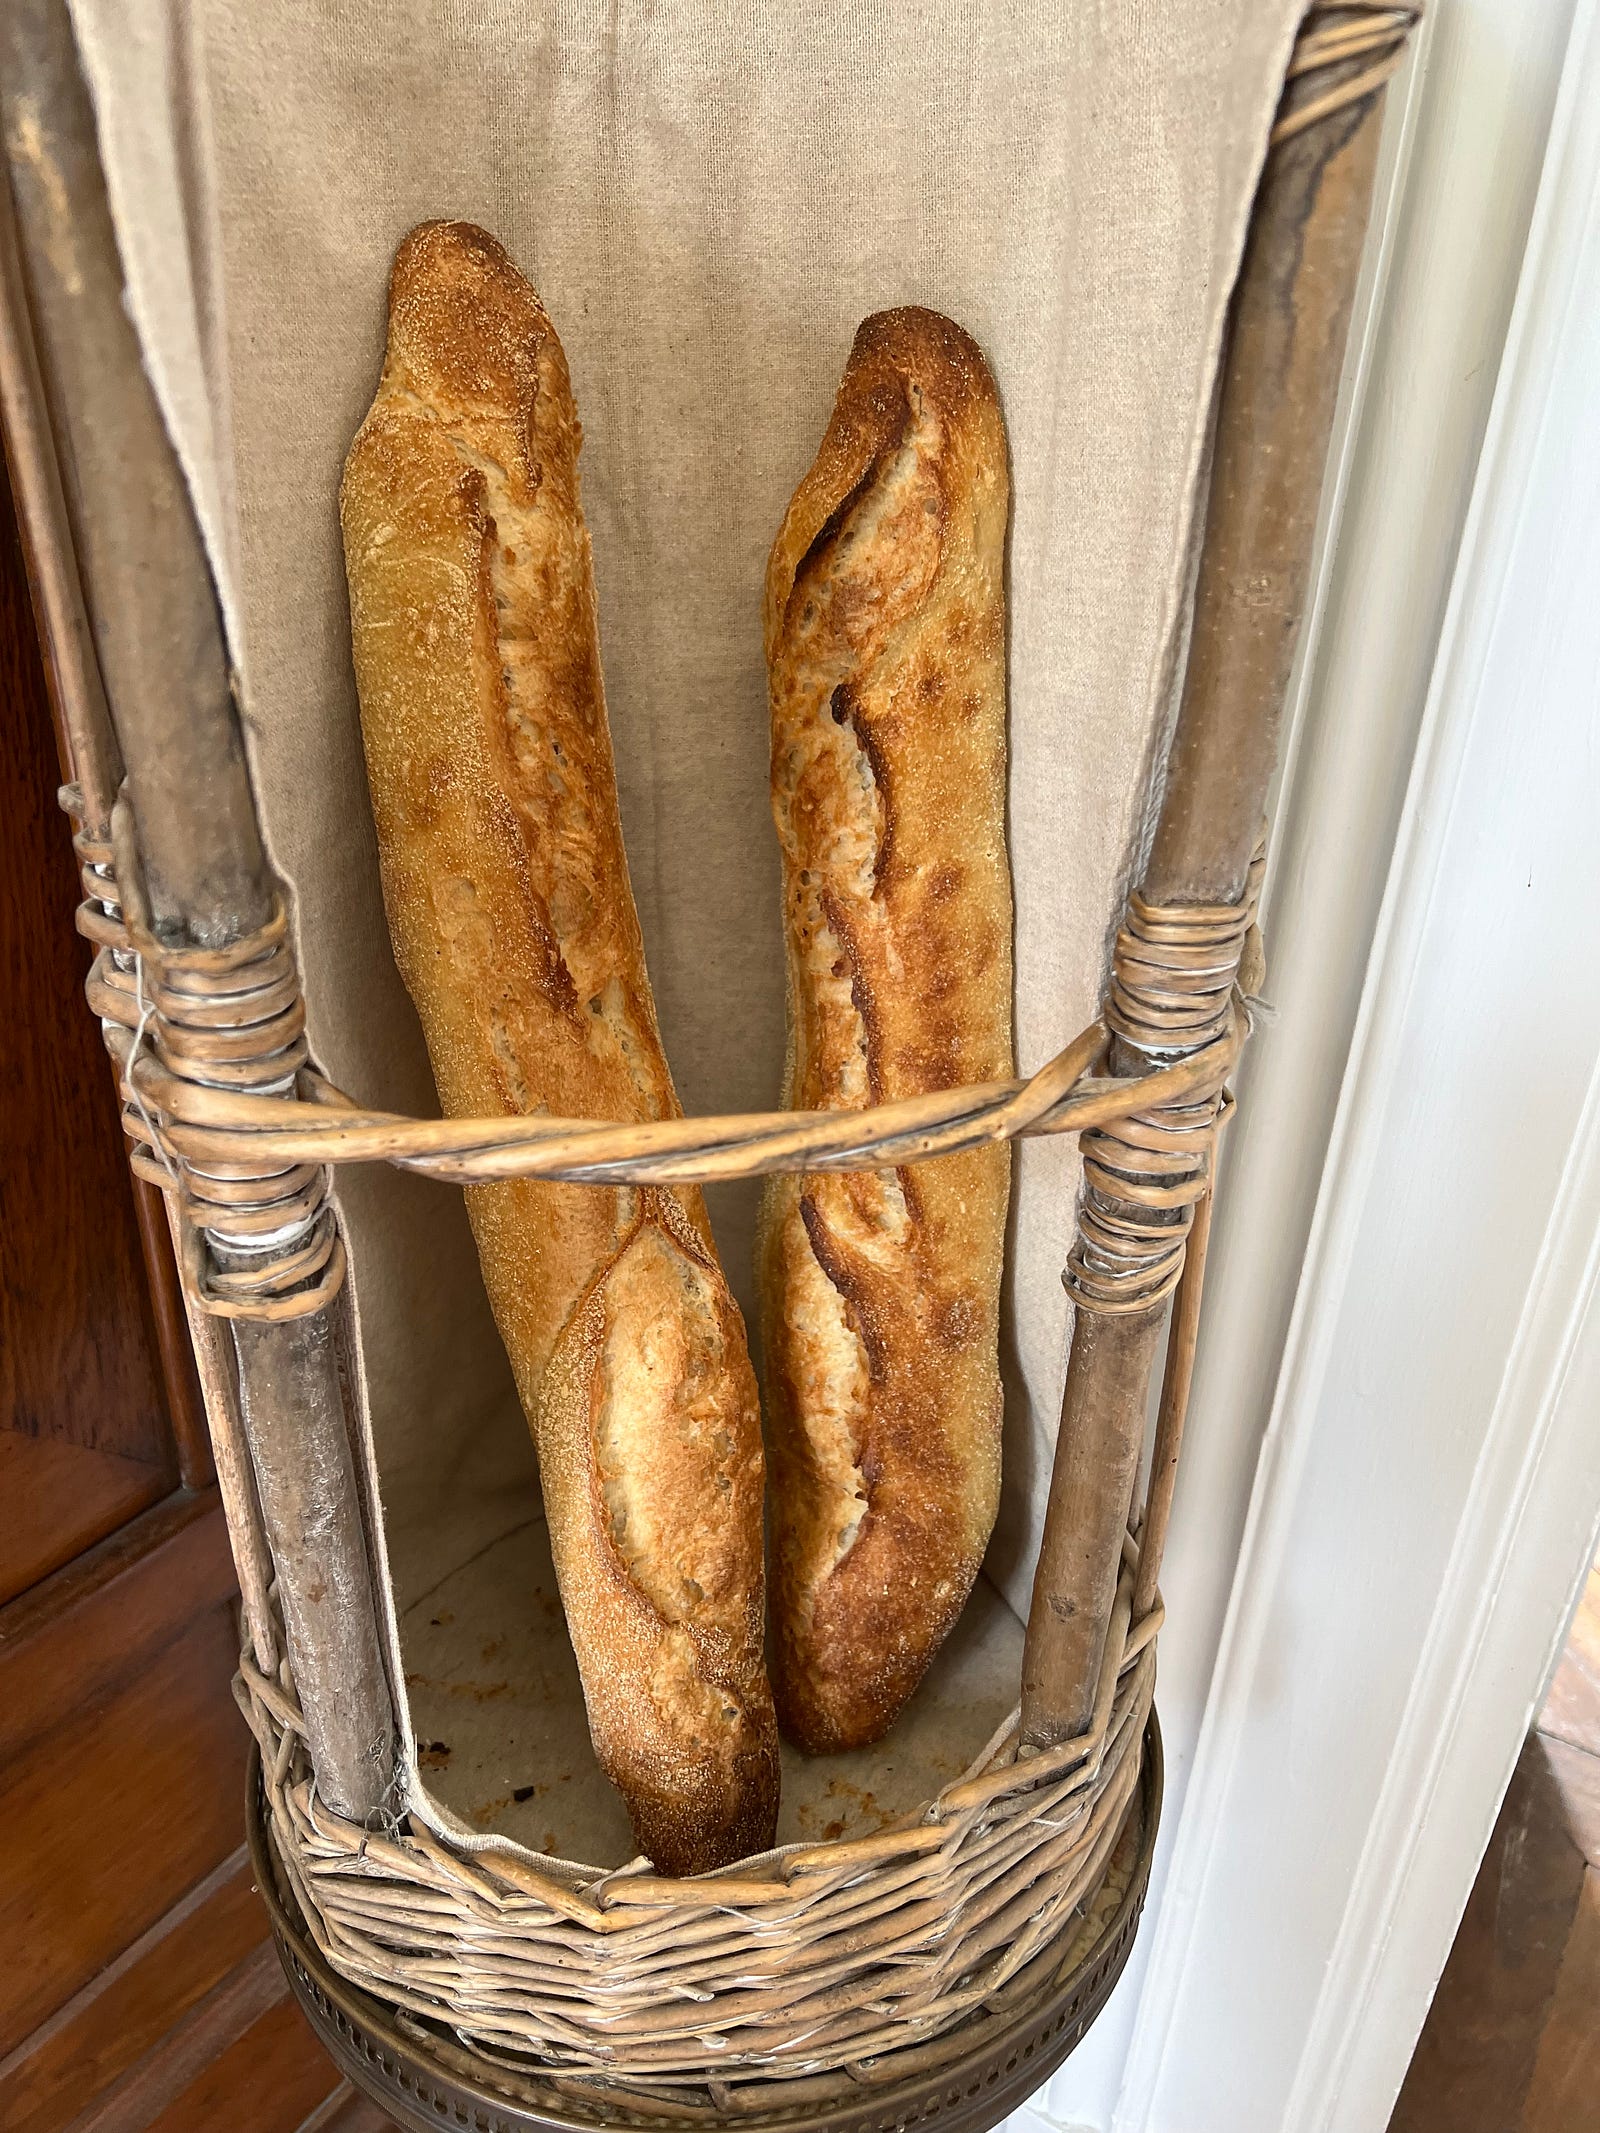 Photo of bread basket at Chateau Orquevaux, France